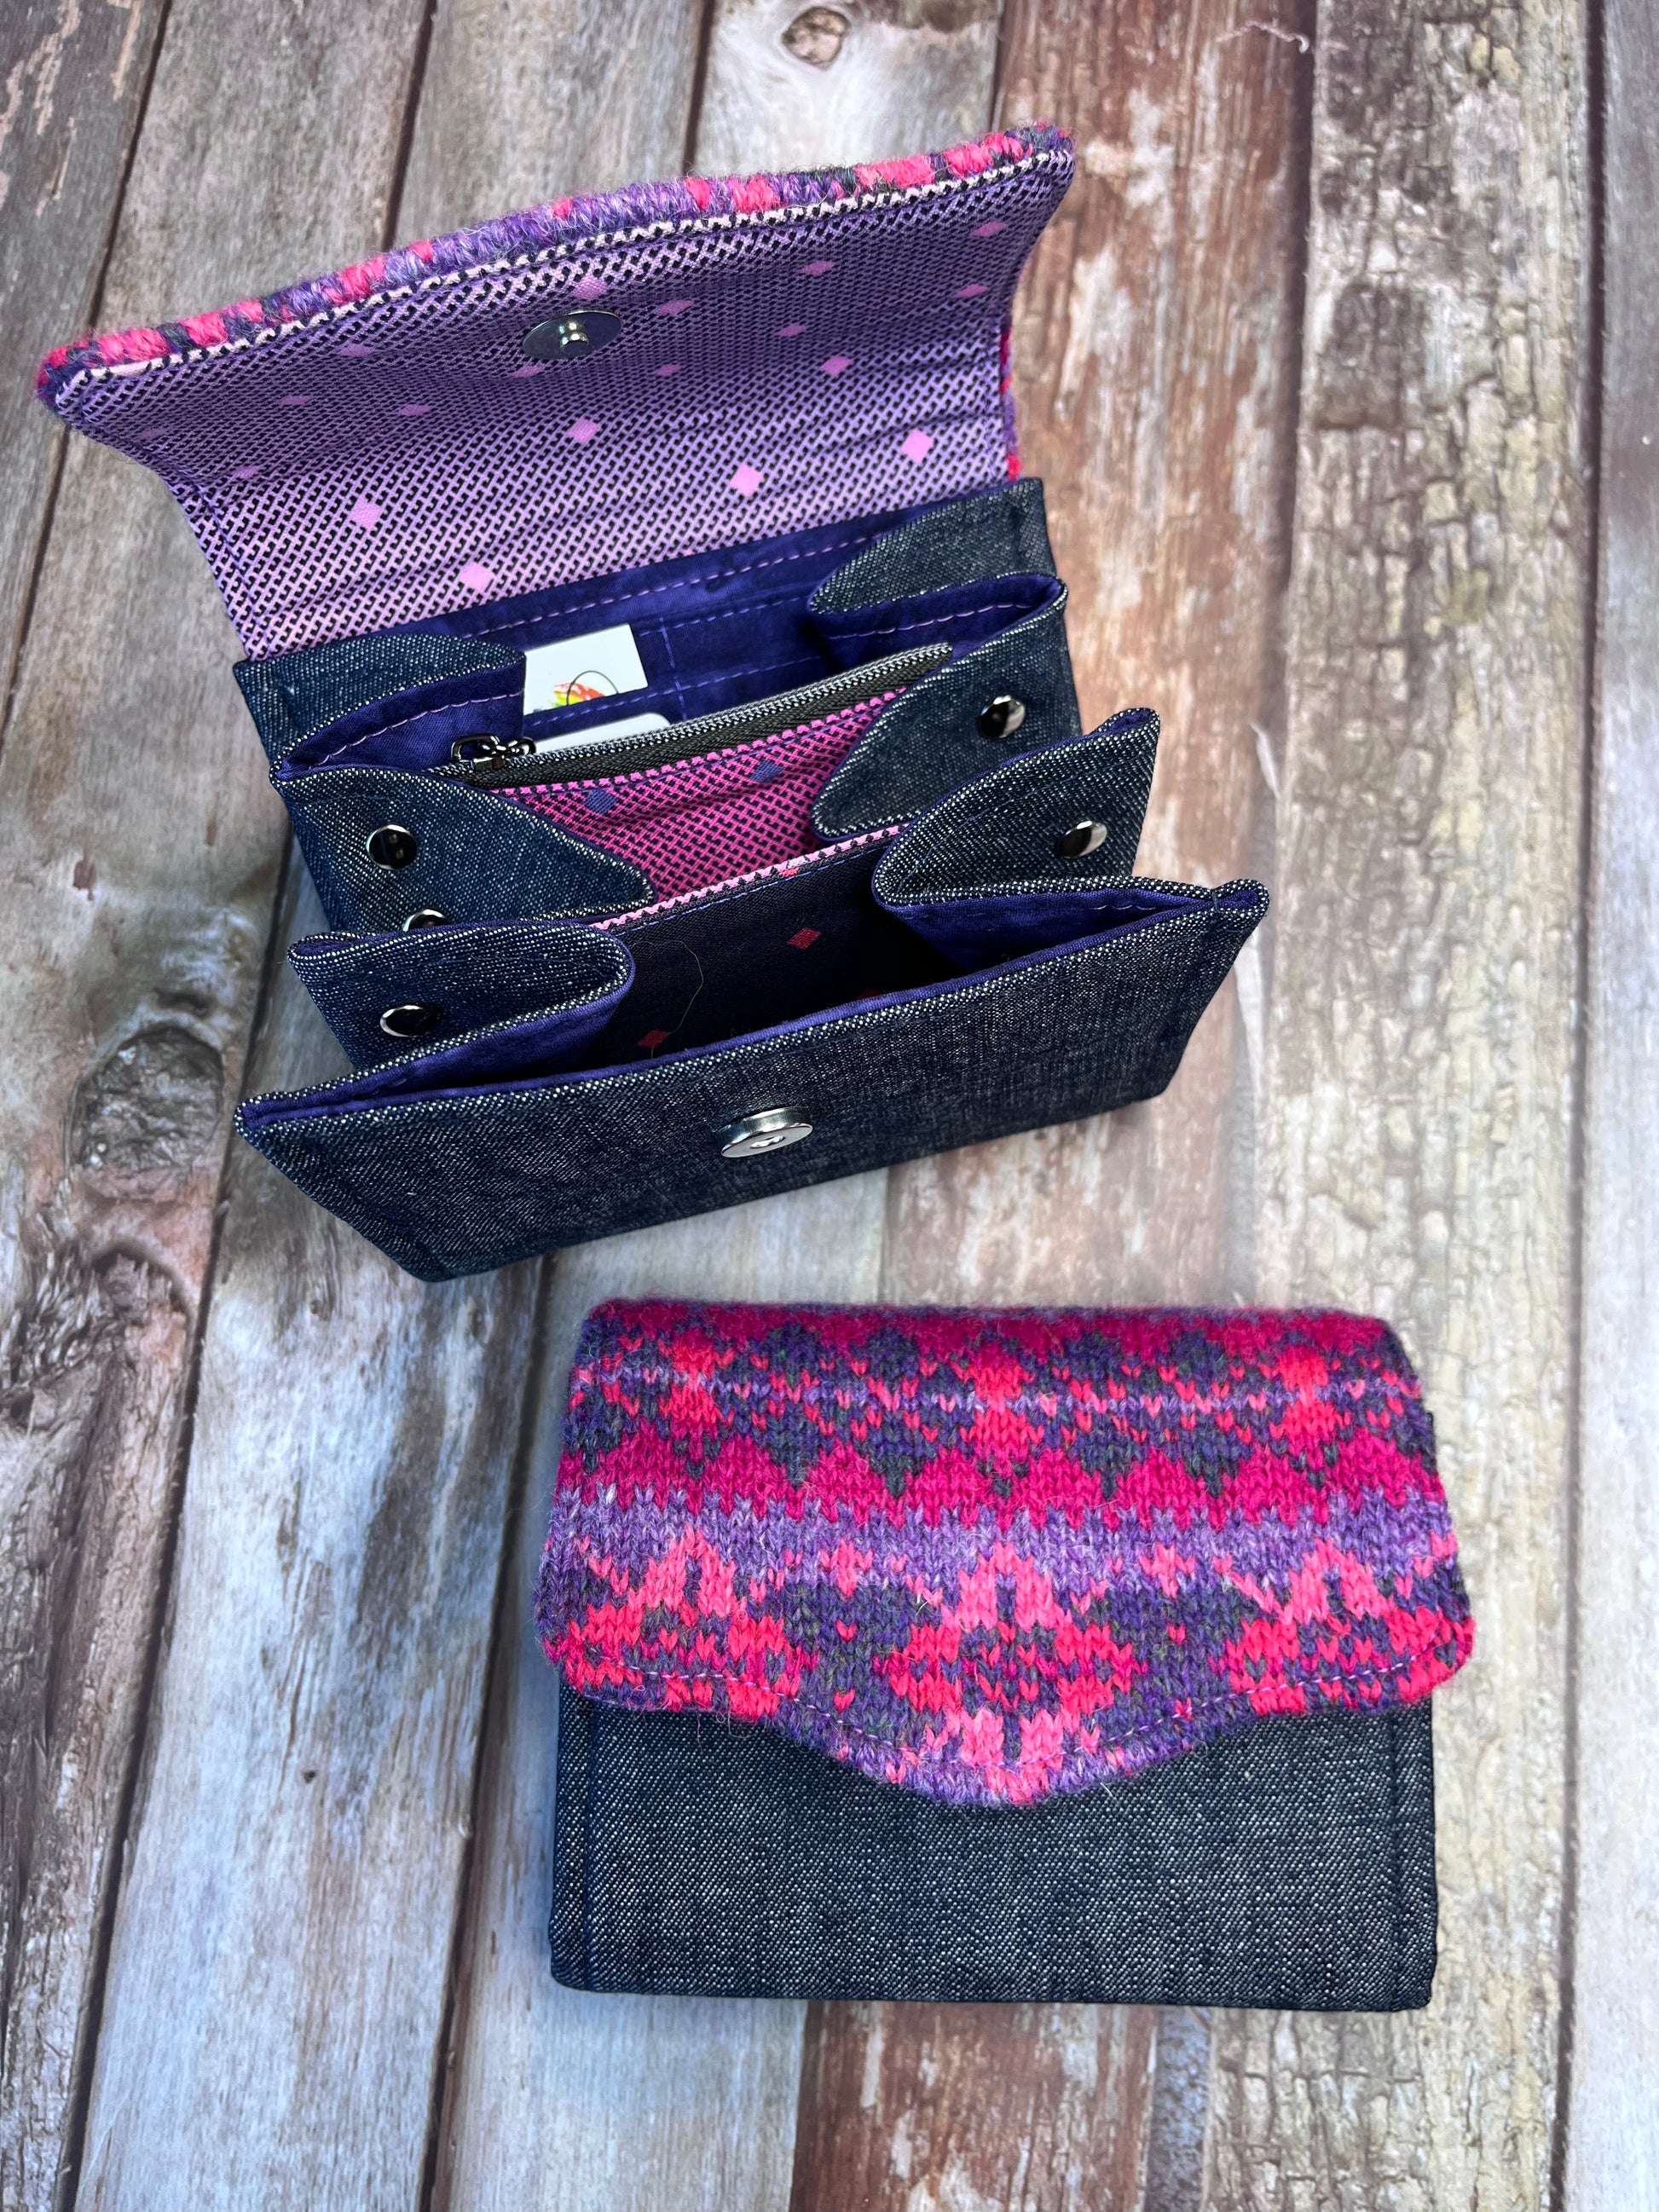 Hand knitted Fair Isle Purse Clutch - Pink Purple - Uphouse Crafts